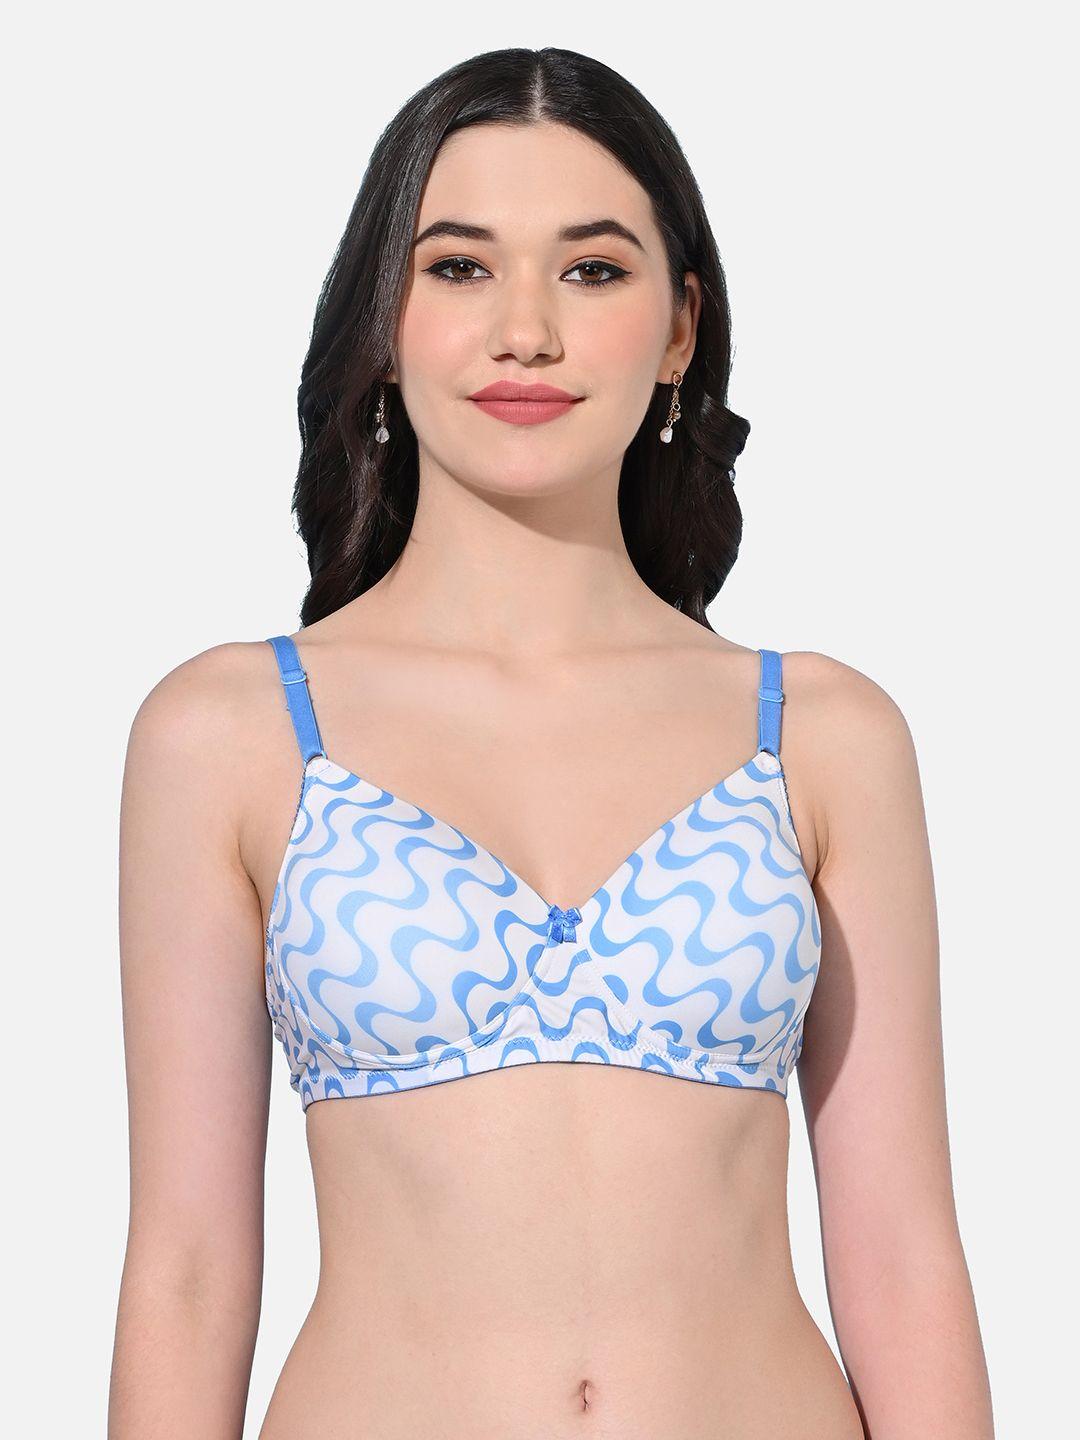 fims-printed-non-wired-full-coverage-seamless-everyday-bra-with-all-day-comfort